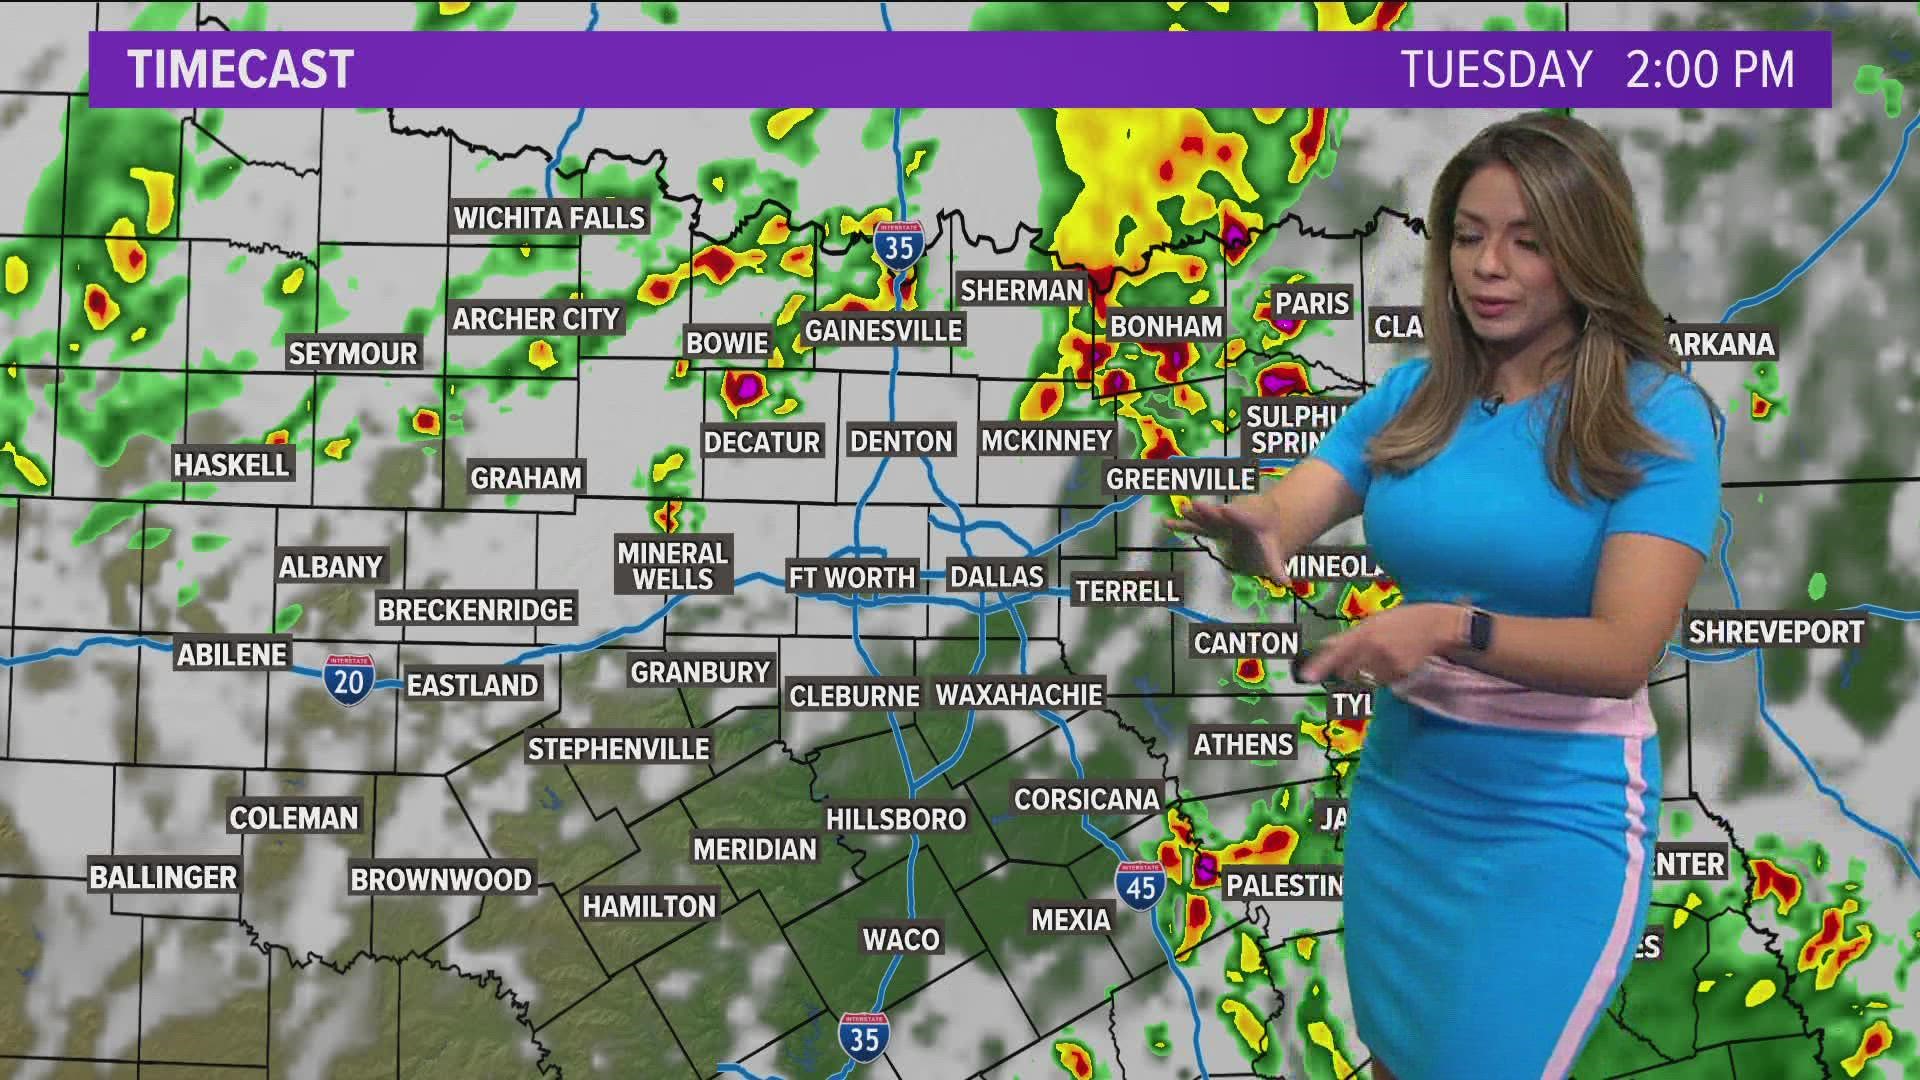 DFW Weather: May 24 midday update tracking strong storms